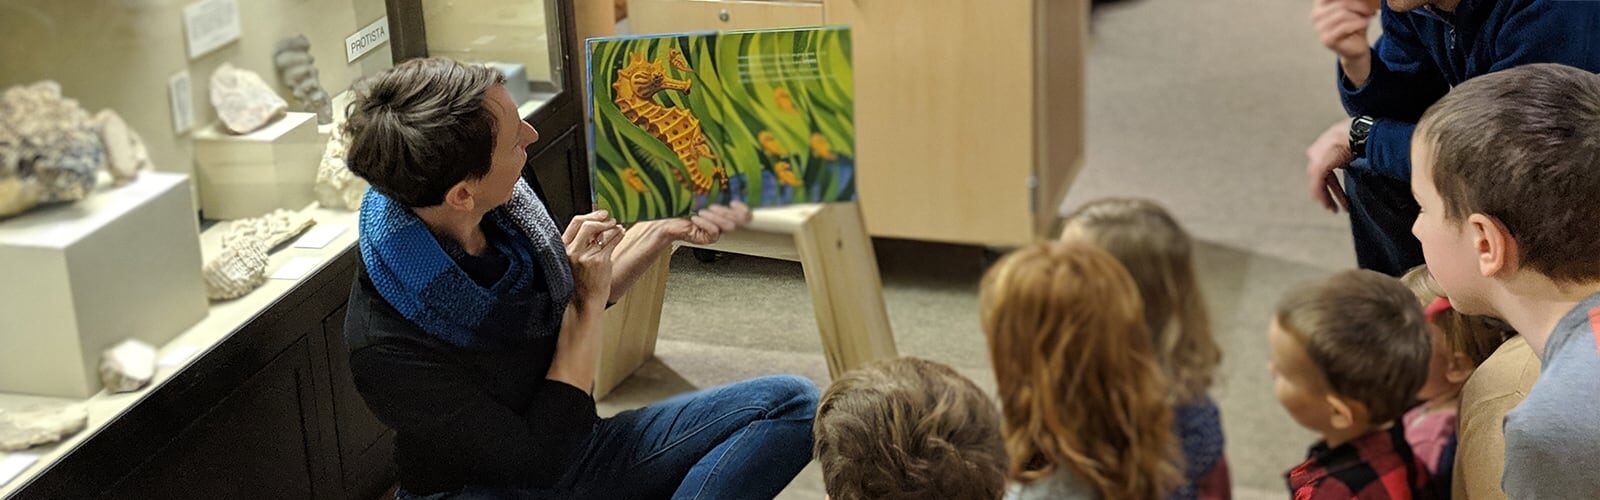 A book about seahorses is read to young visitors.